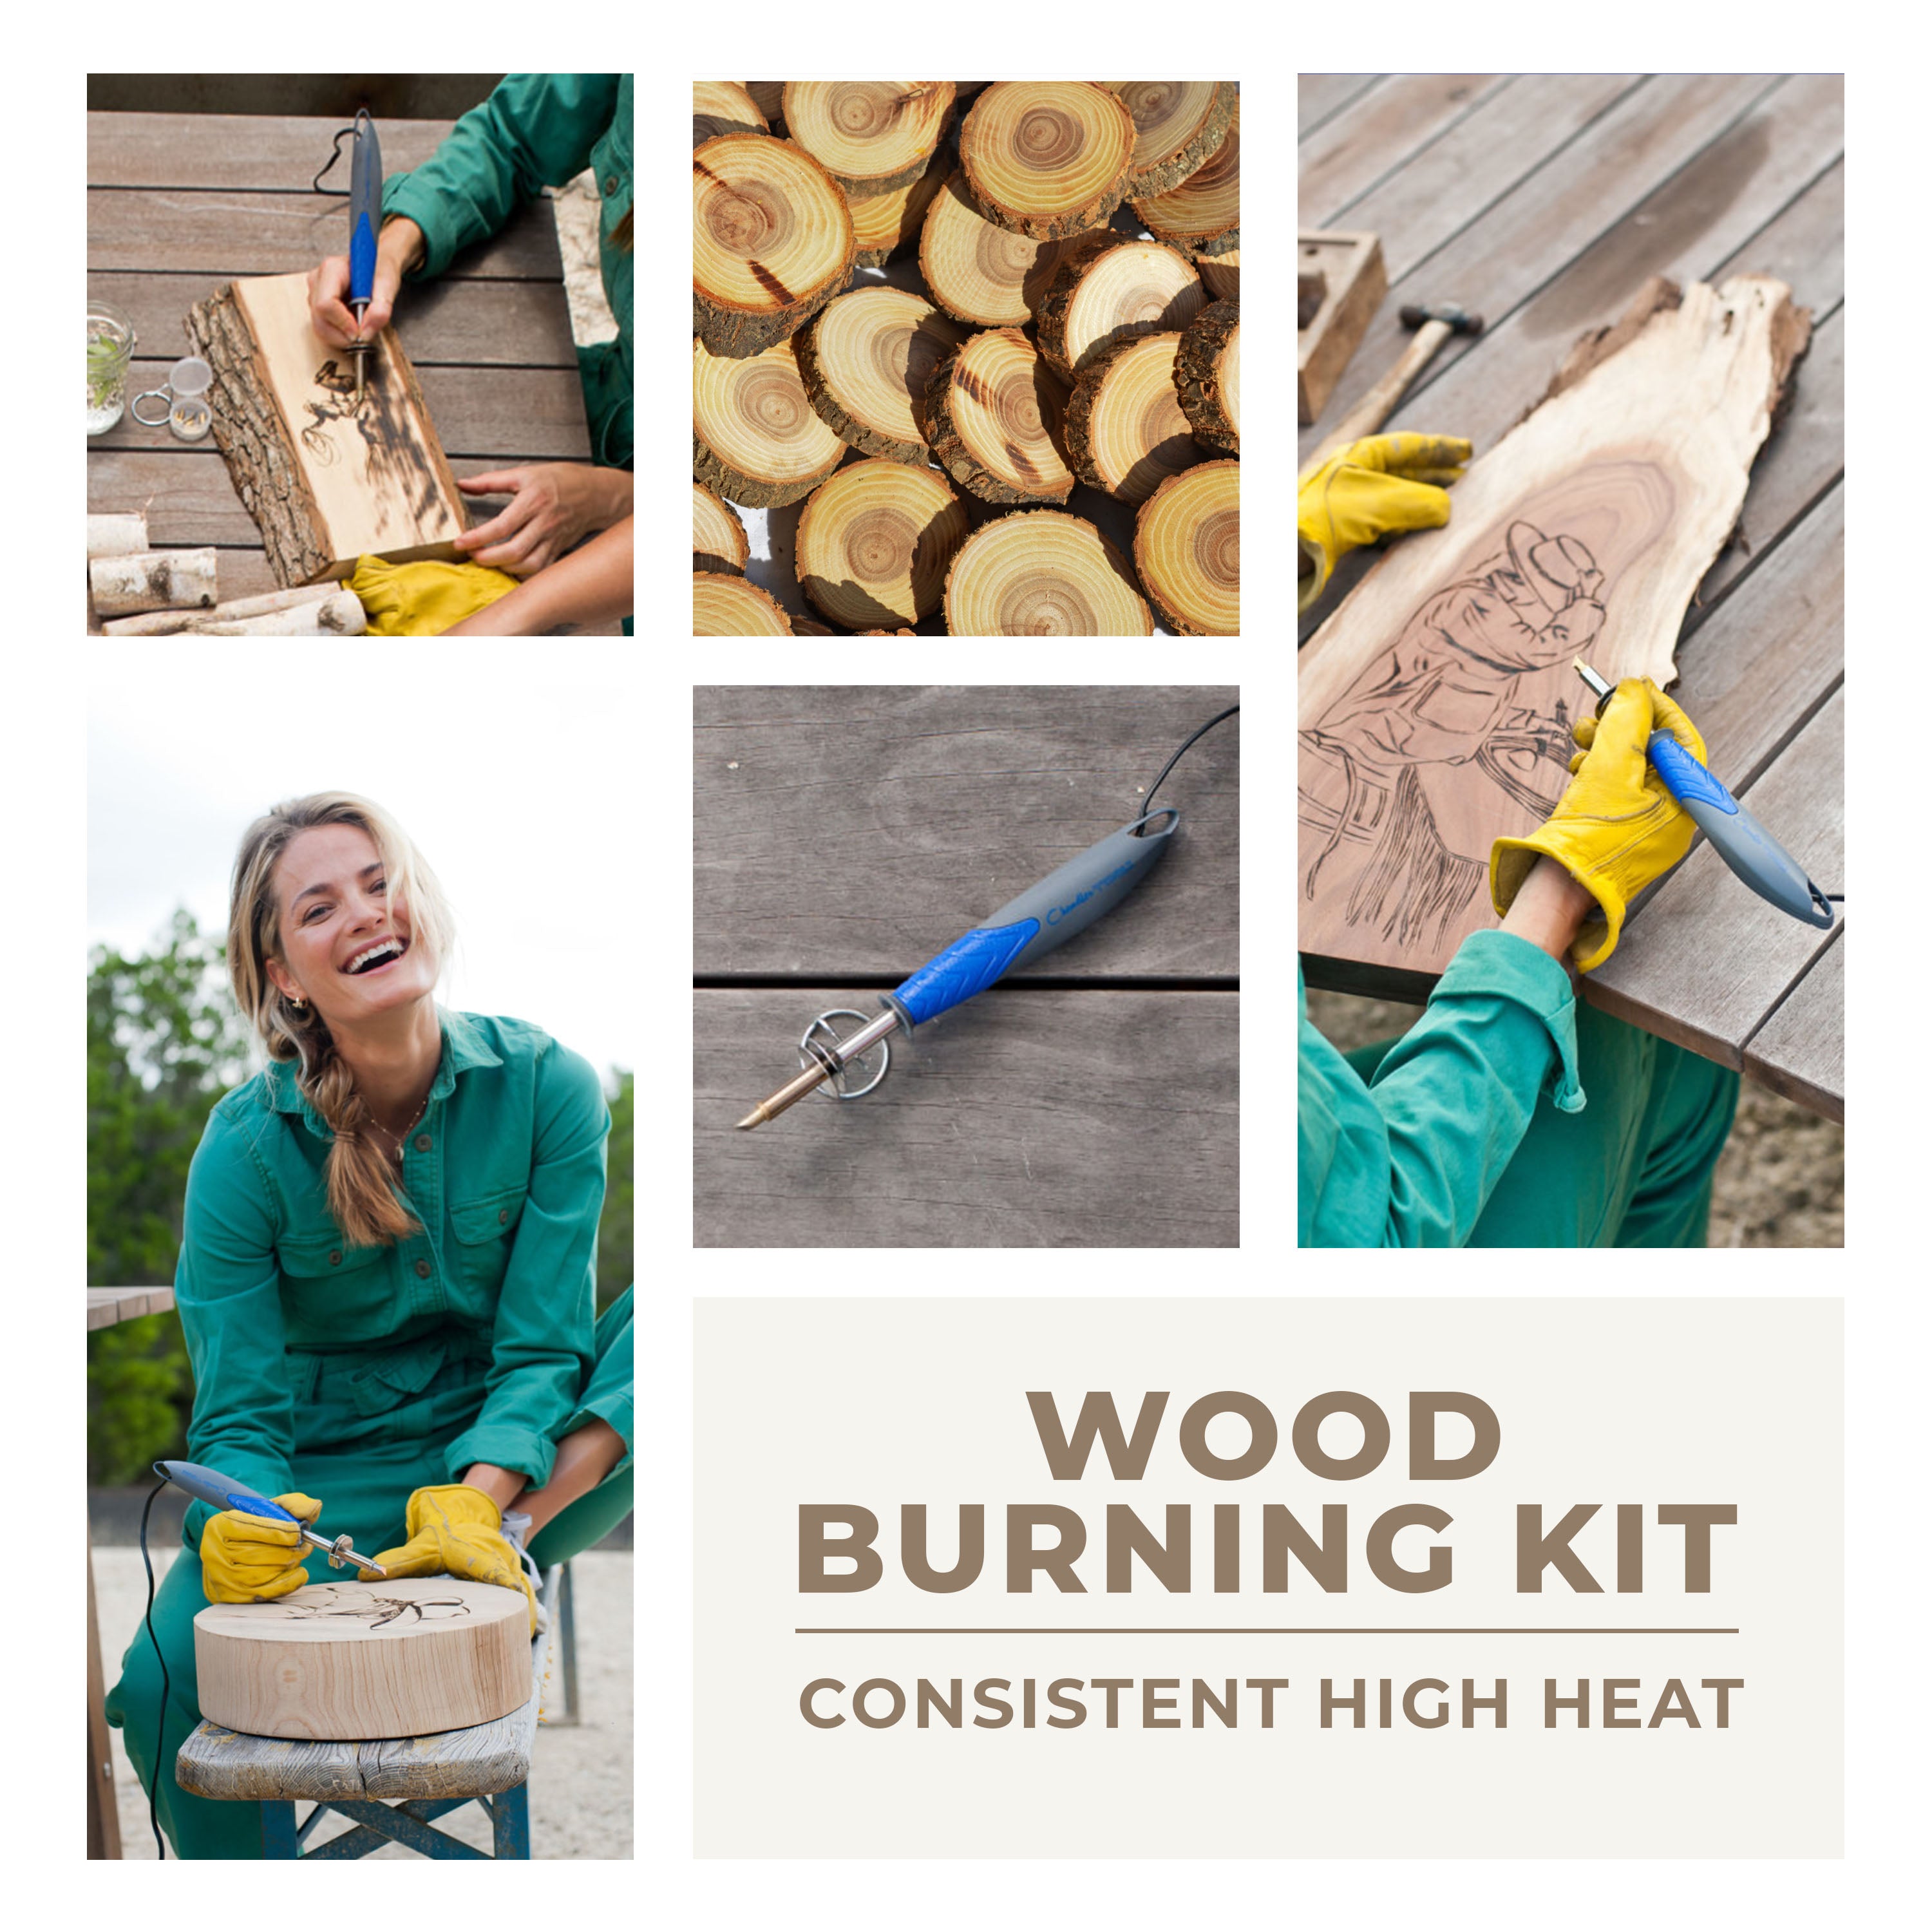 Gener8 Wood Burning Kit Recommended Teens Ages 14 Years and up. 